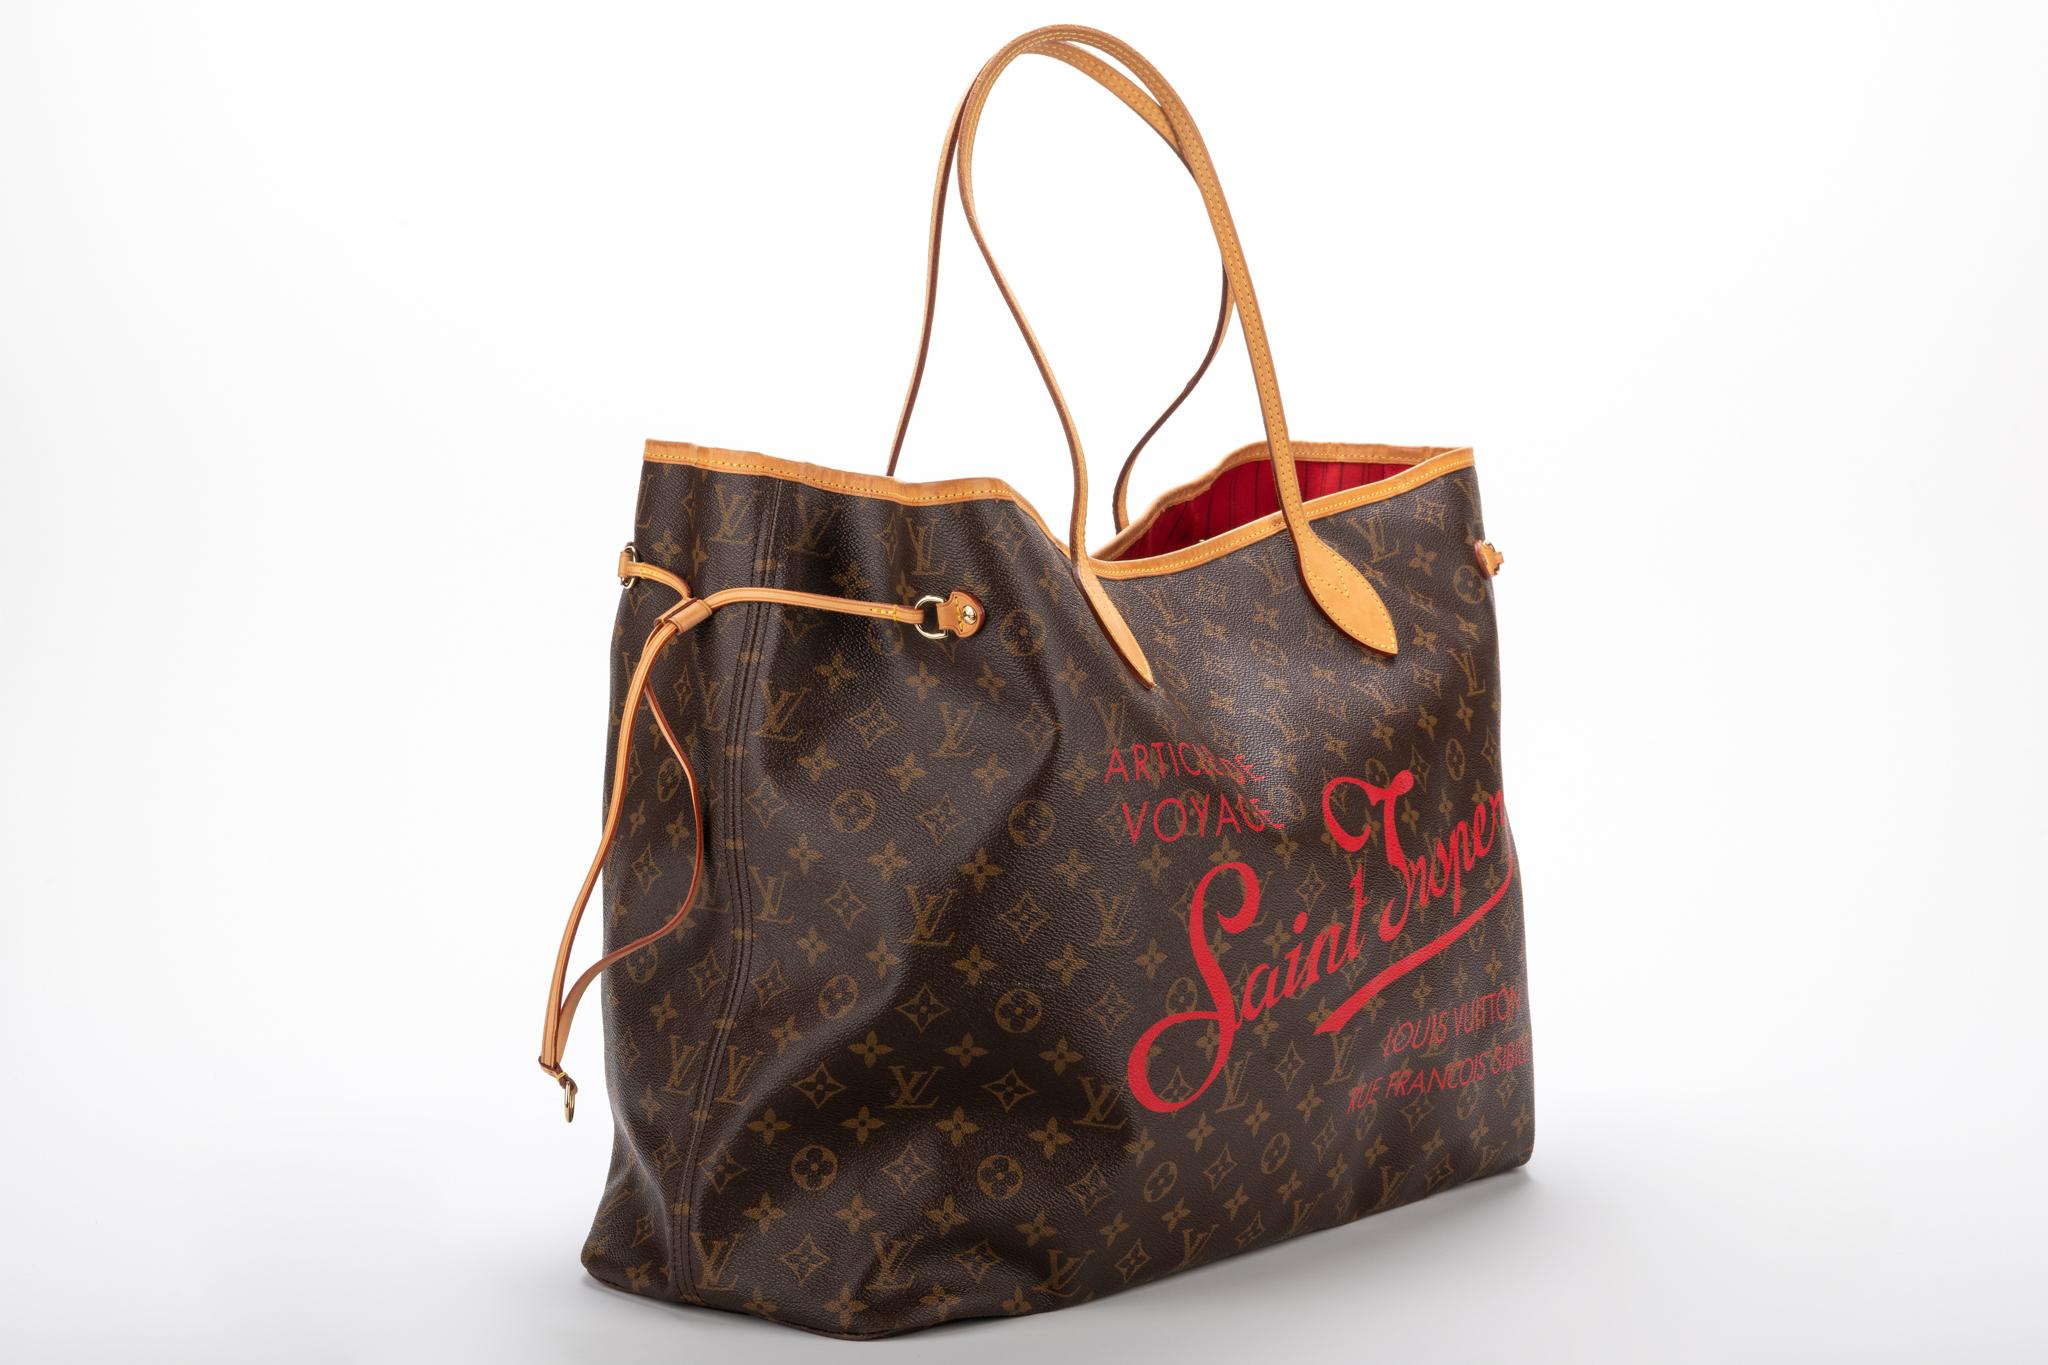 Louis Vuitton super limited edition from the 2010 reopening of the St Tropez store. XXL size not available in commerce. Comes with the original dust cover. 